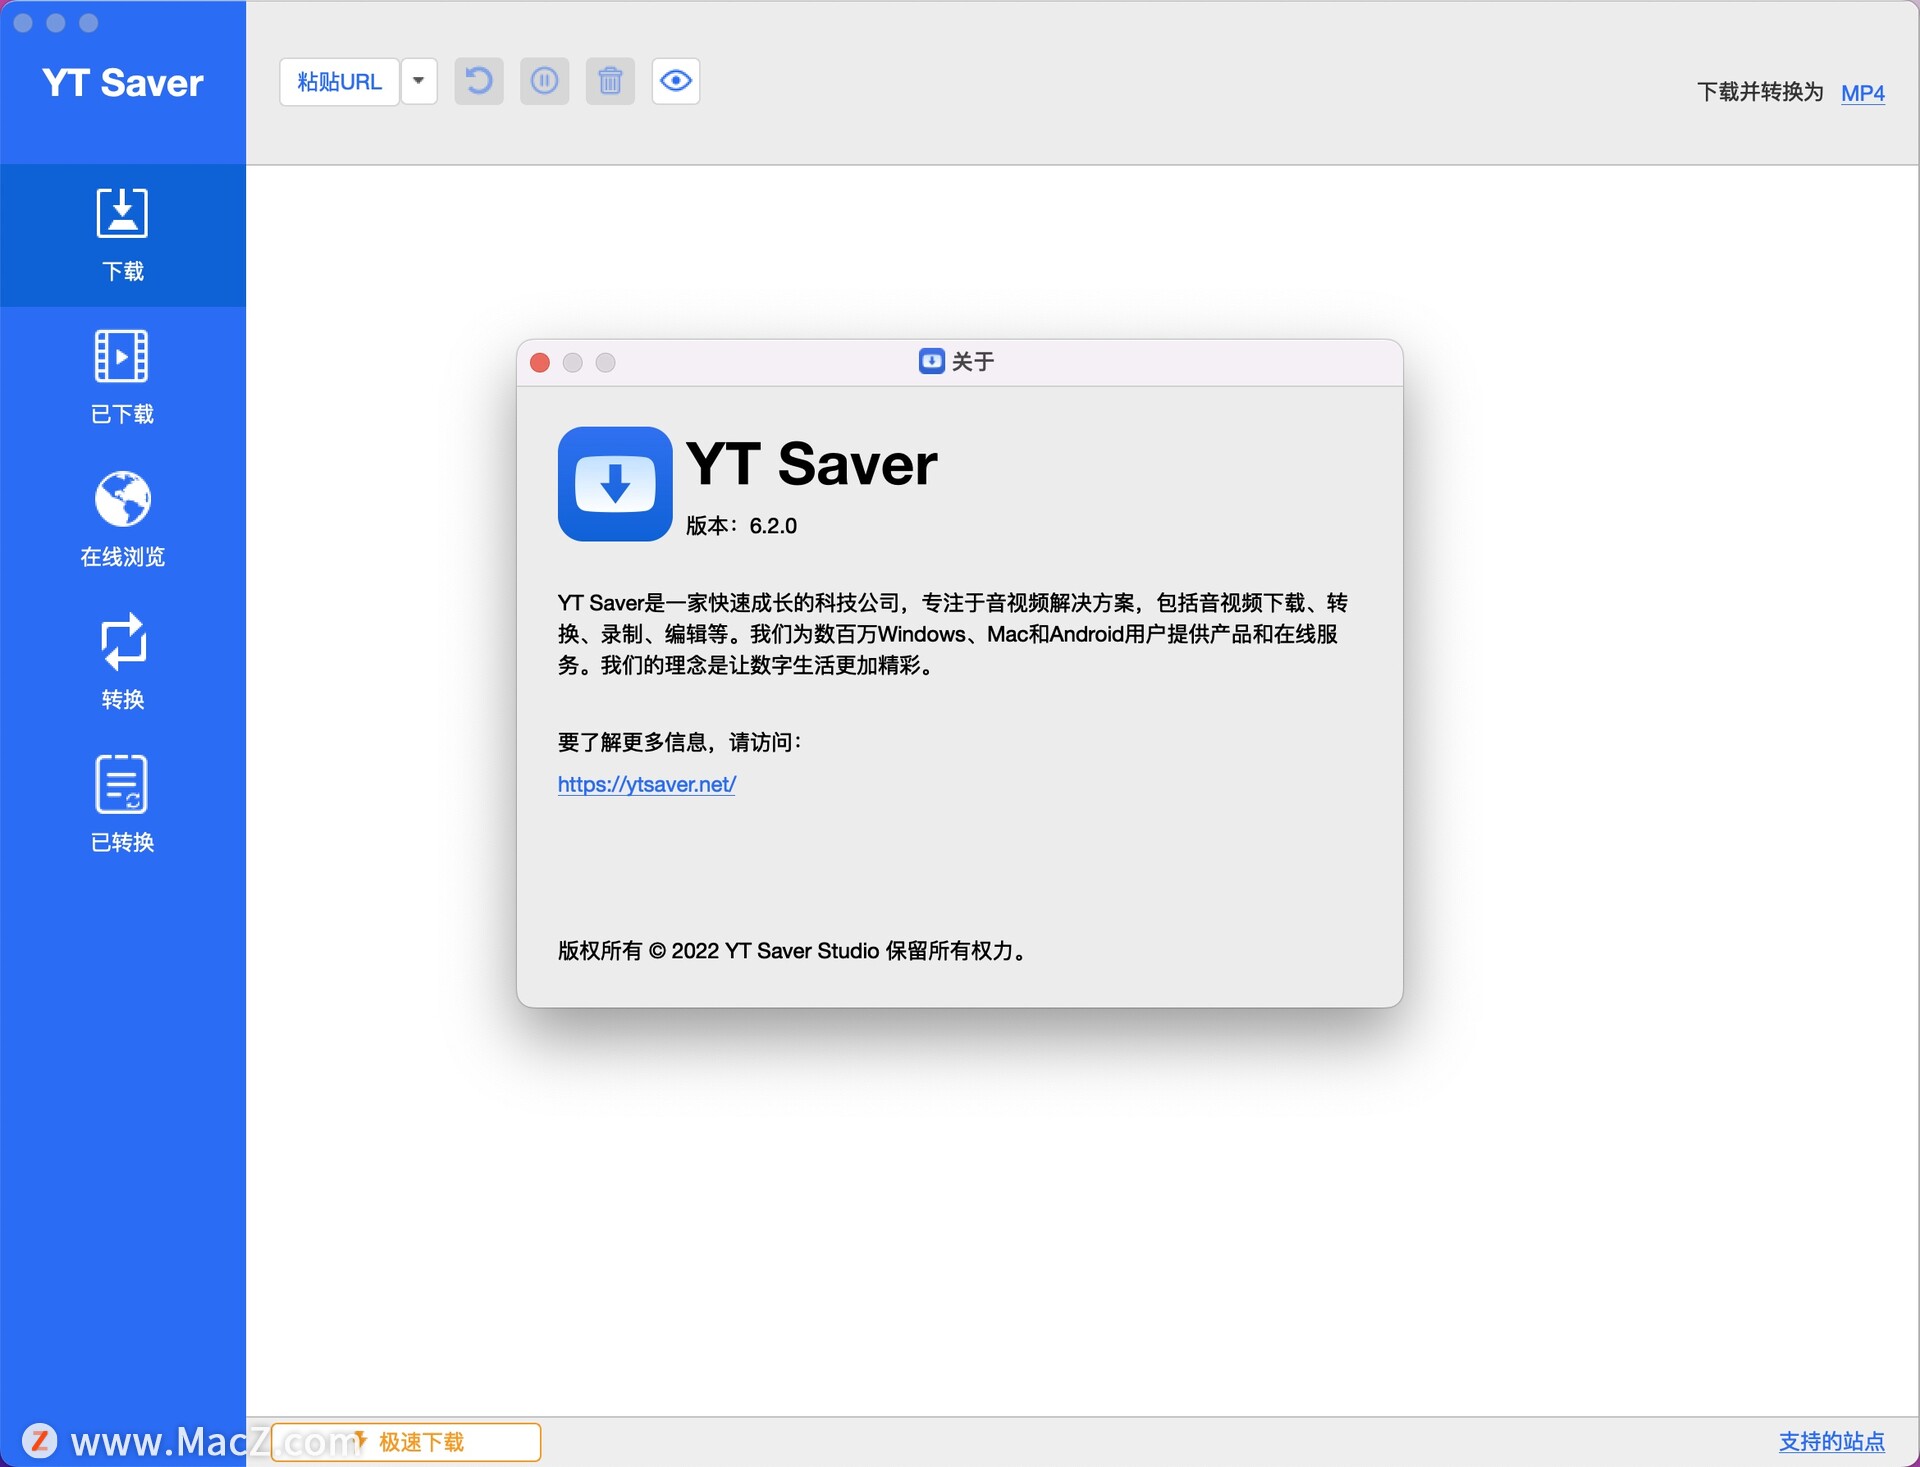 YT Saver 7.0.1 download the new for windows